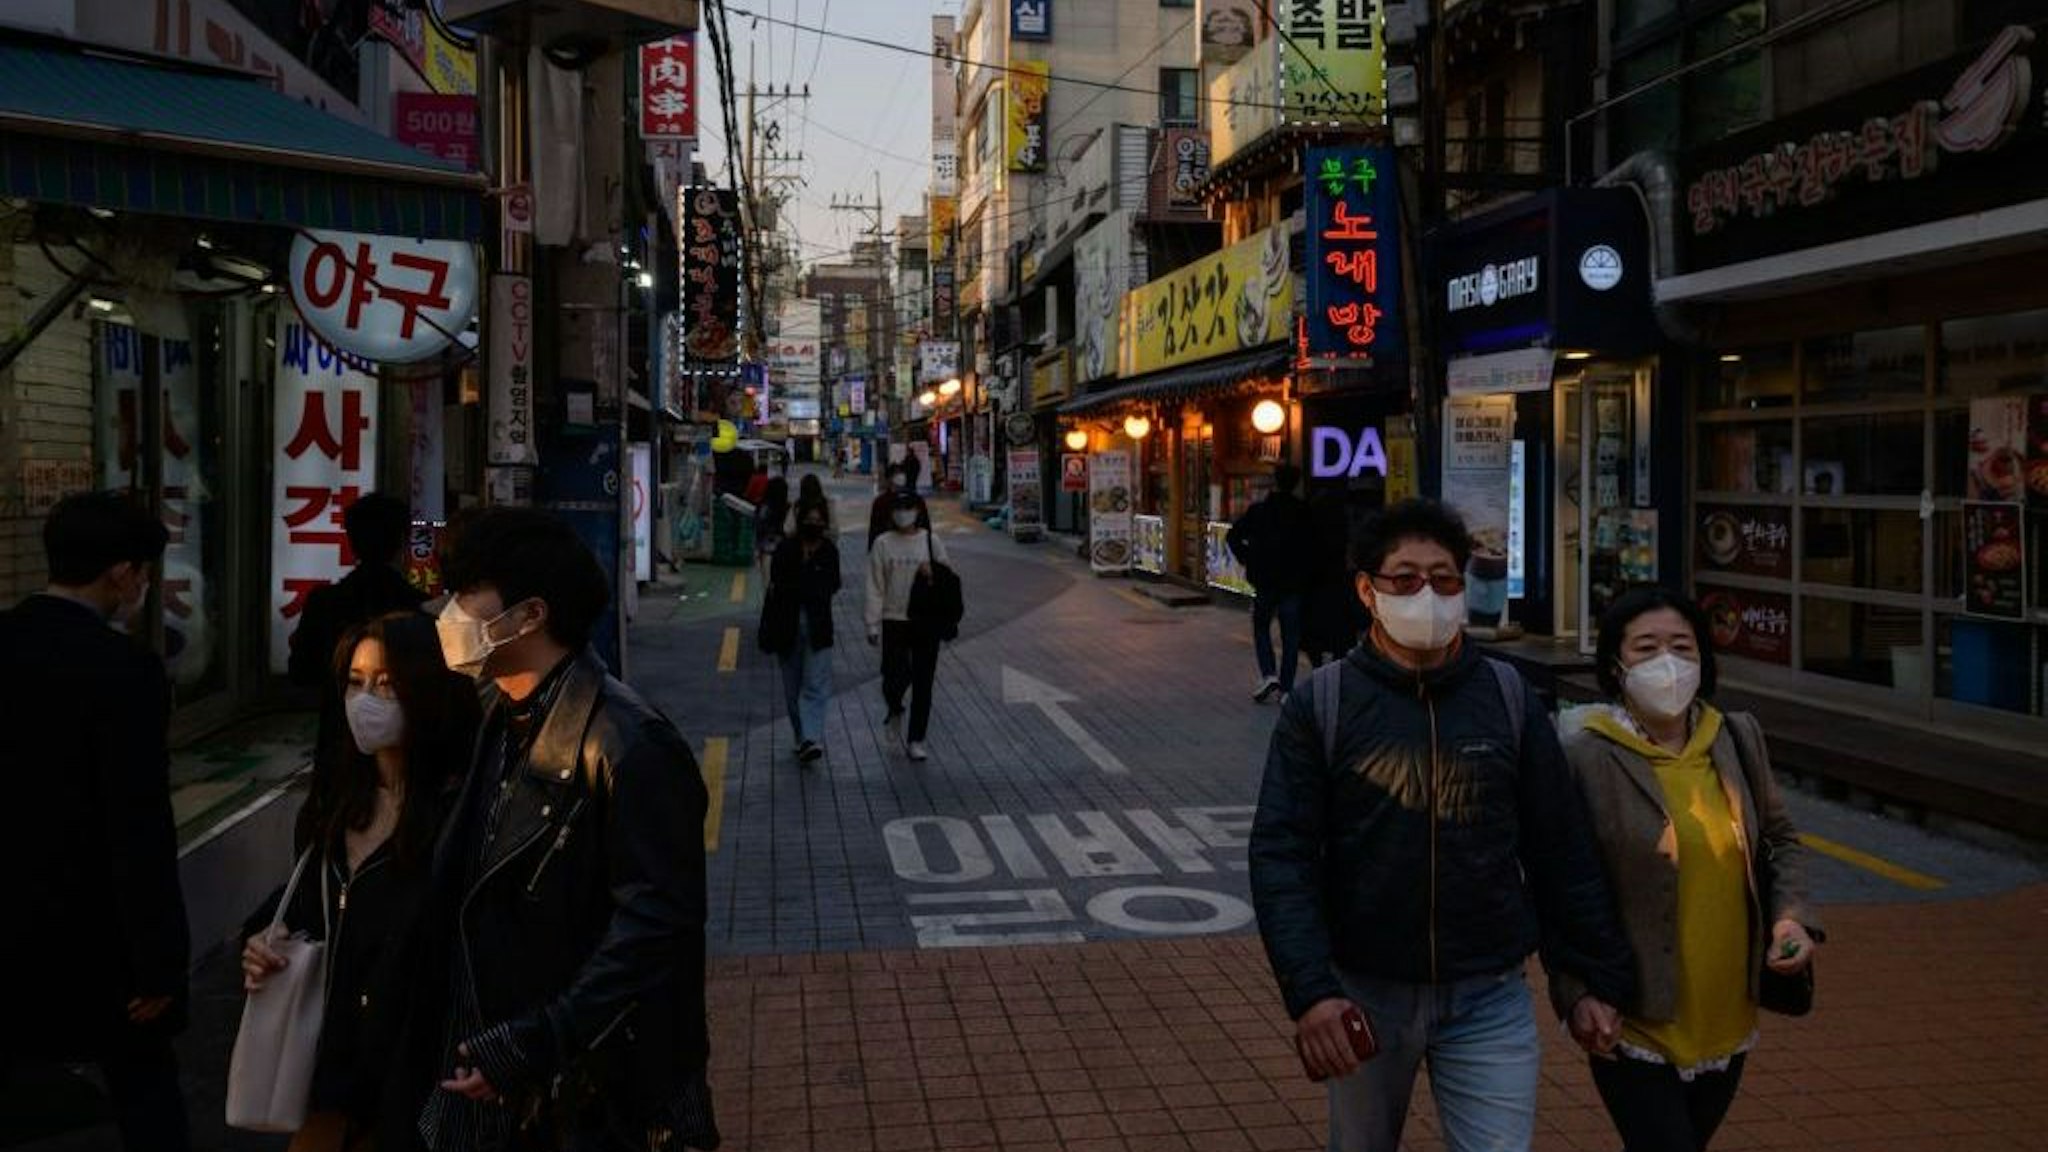 People wearing face masks amid concerns over the COVID-19 novel coronavirus, walk through an alleyway in Seoul on Marh 24, 2020. (Photo by Ed JONES / AFP)